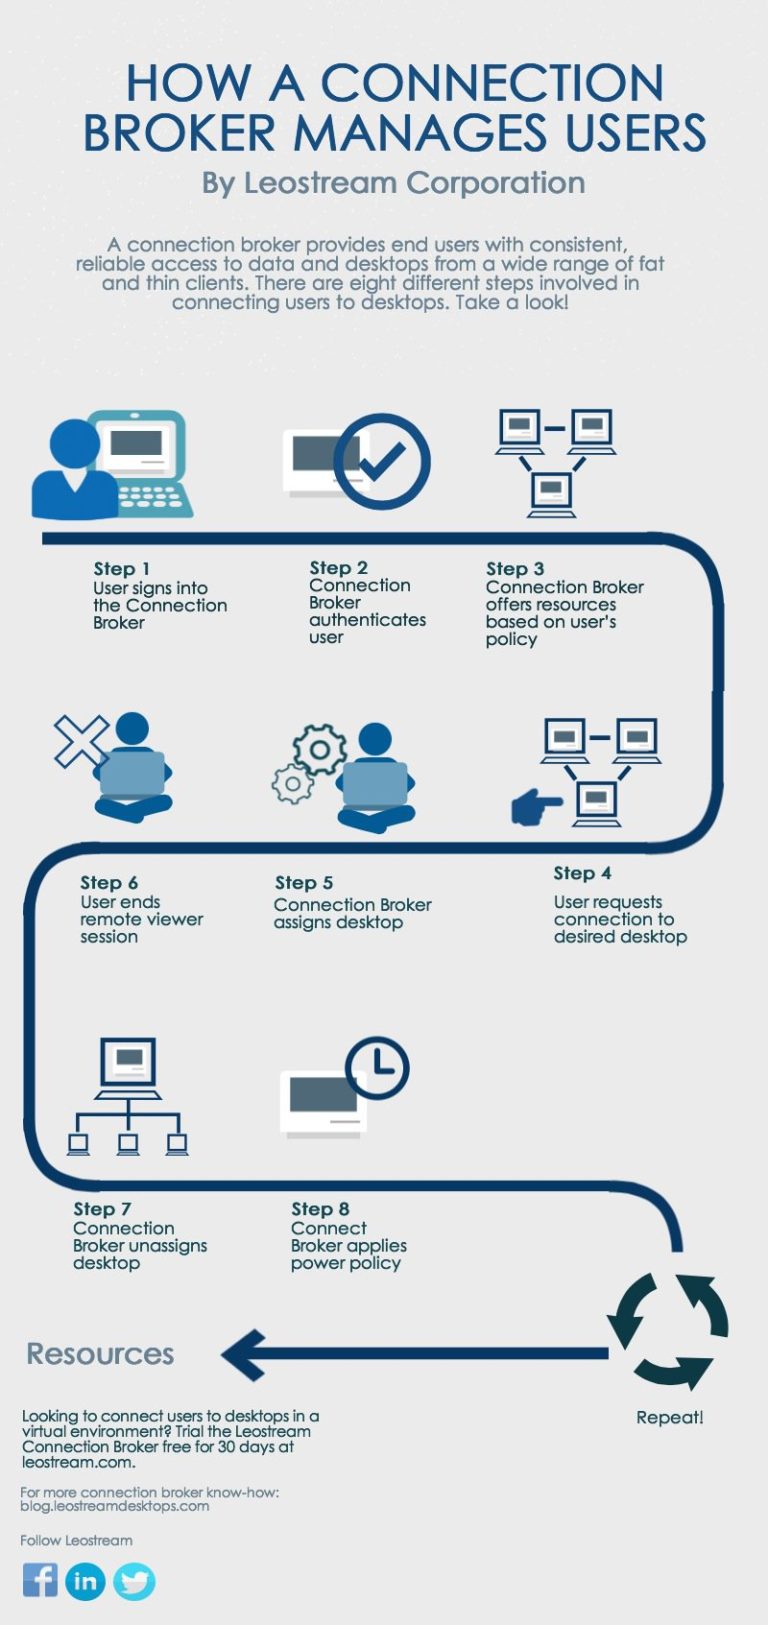 How A Connection Broker Manages Users: The 8 Step Guide [Infographic]